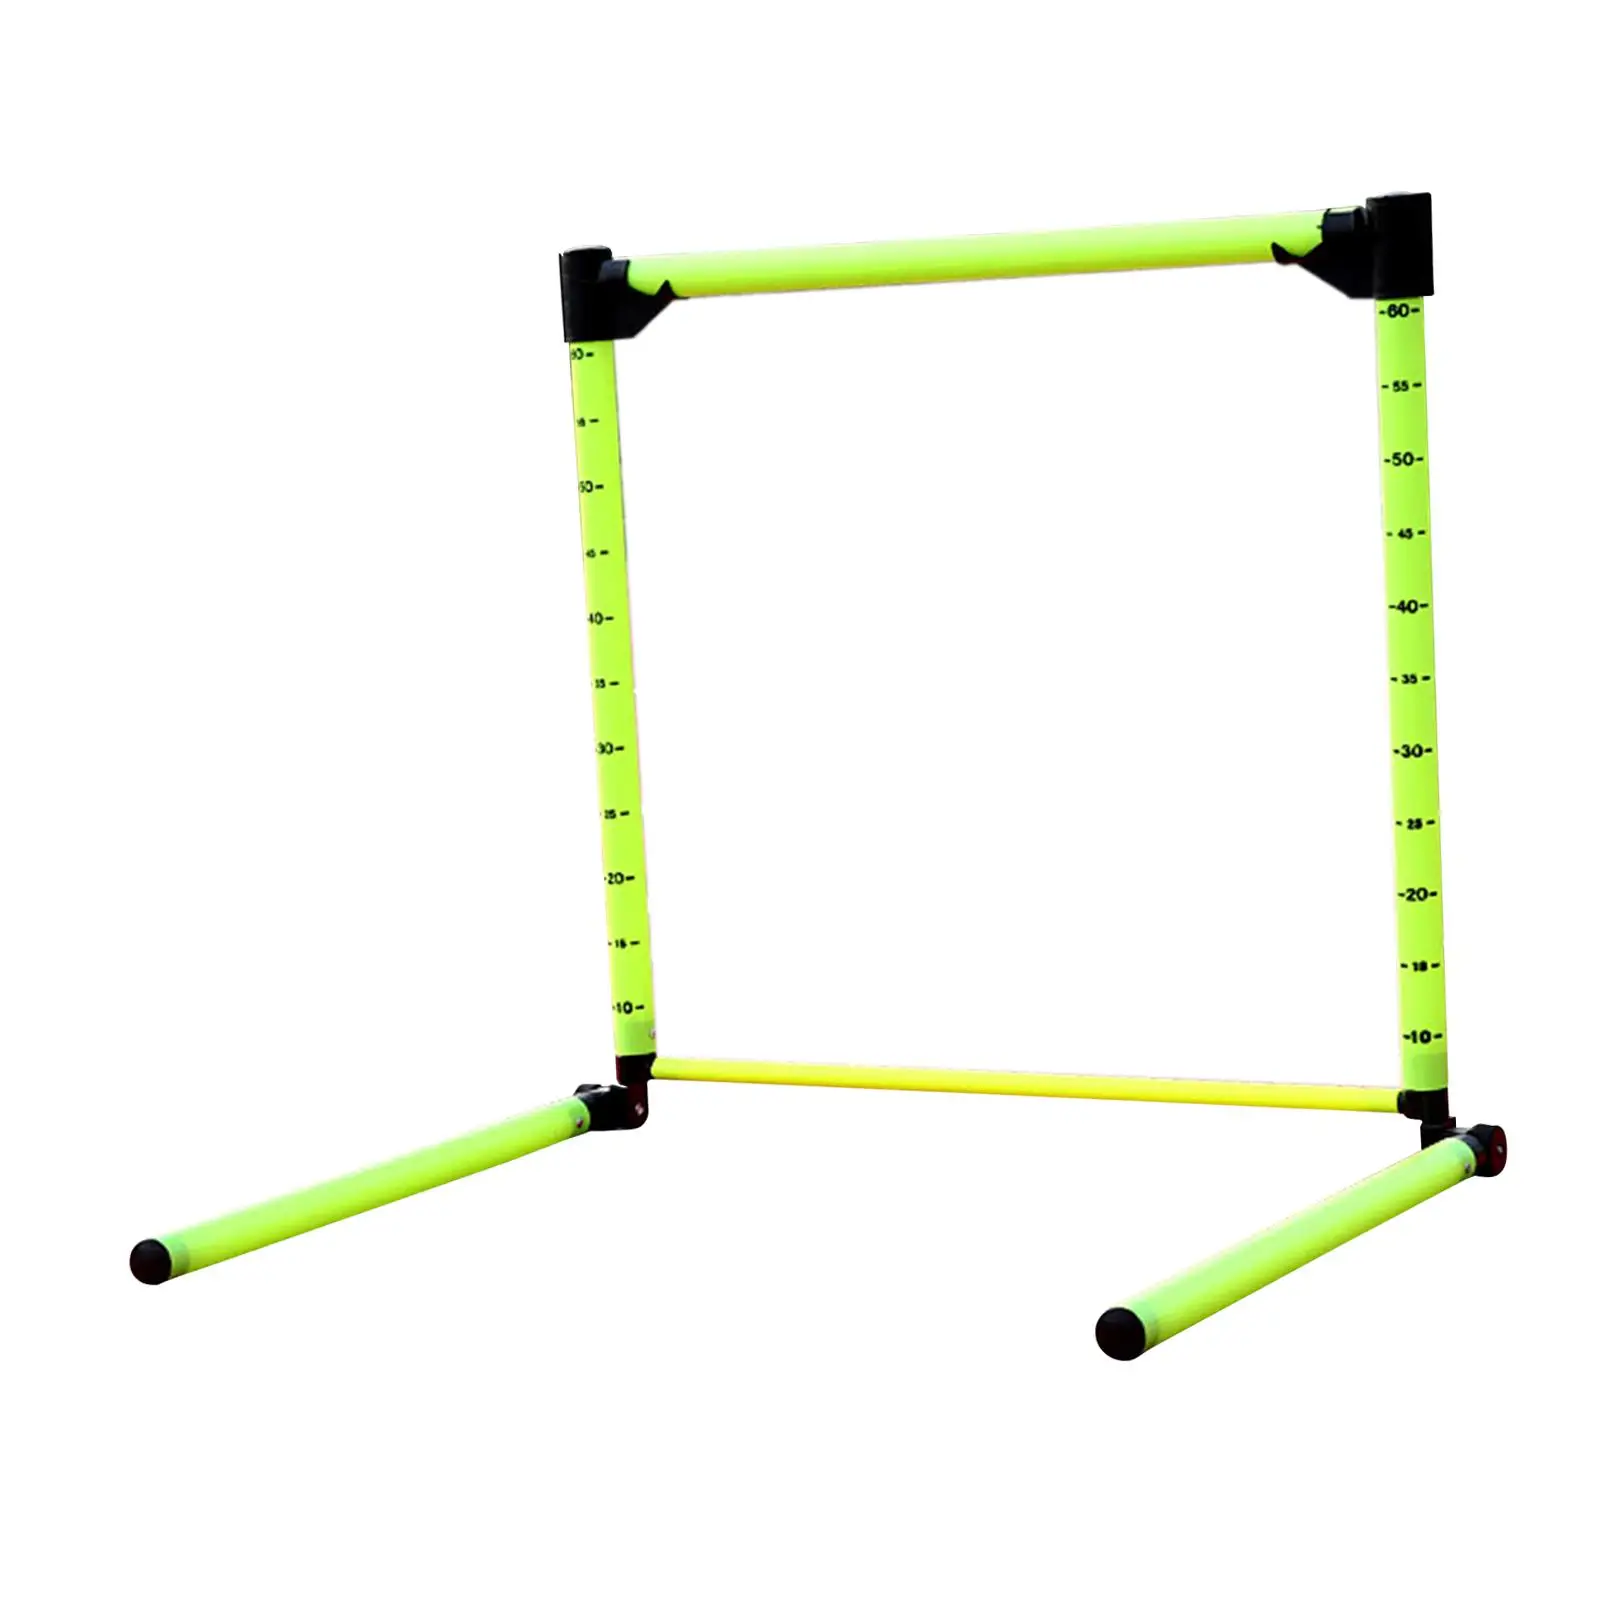 Adjustable Height Agility Hurdles, Track and Field Speed and Agility Training